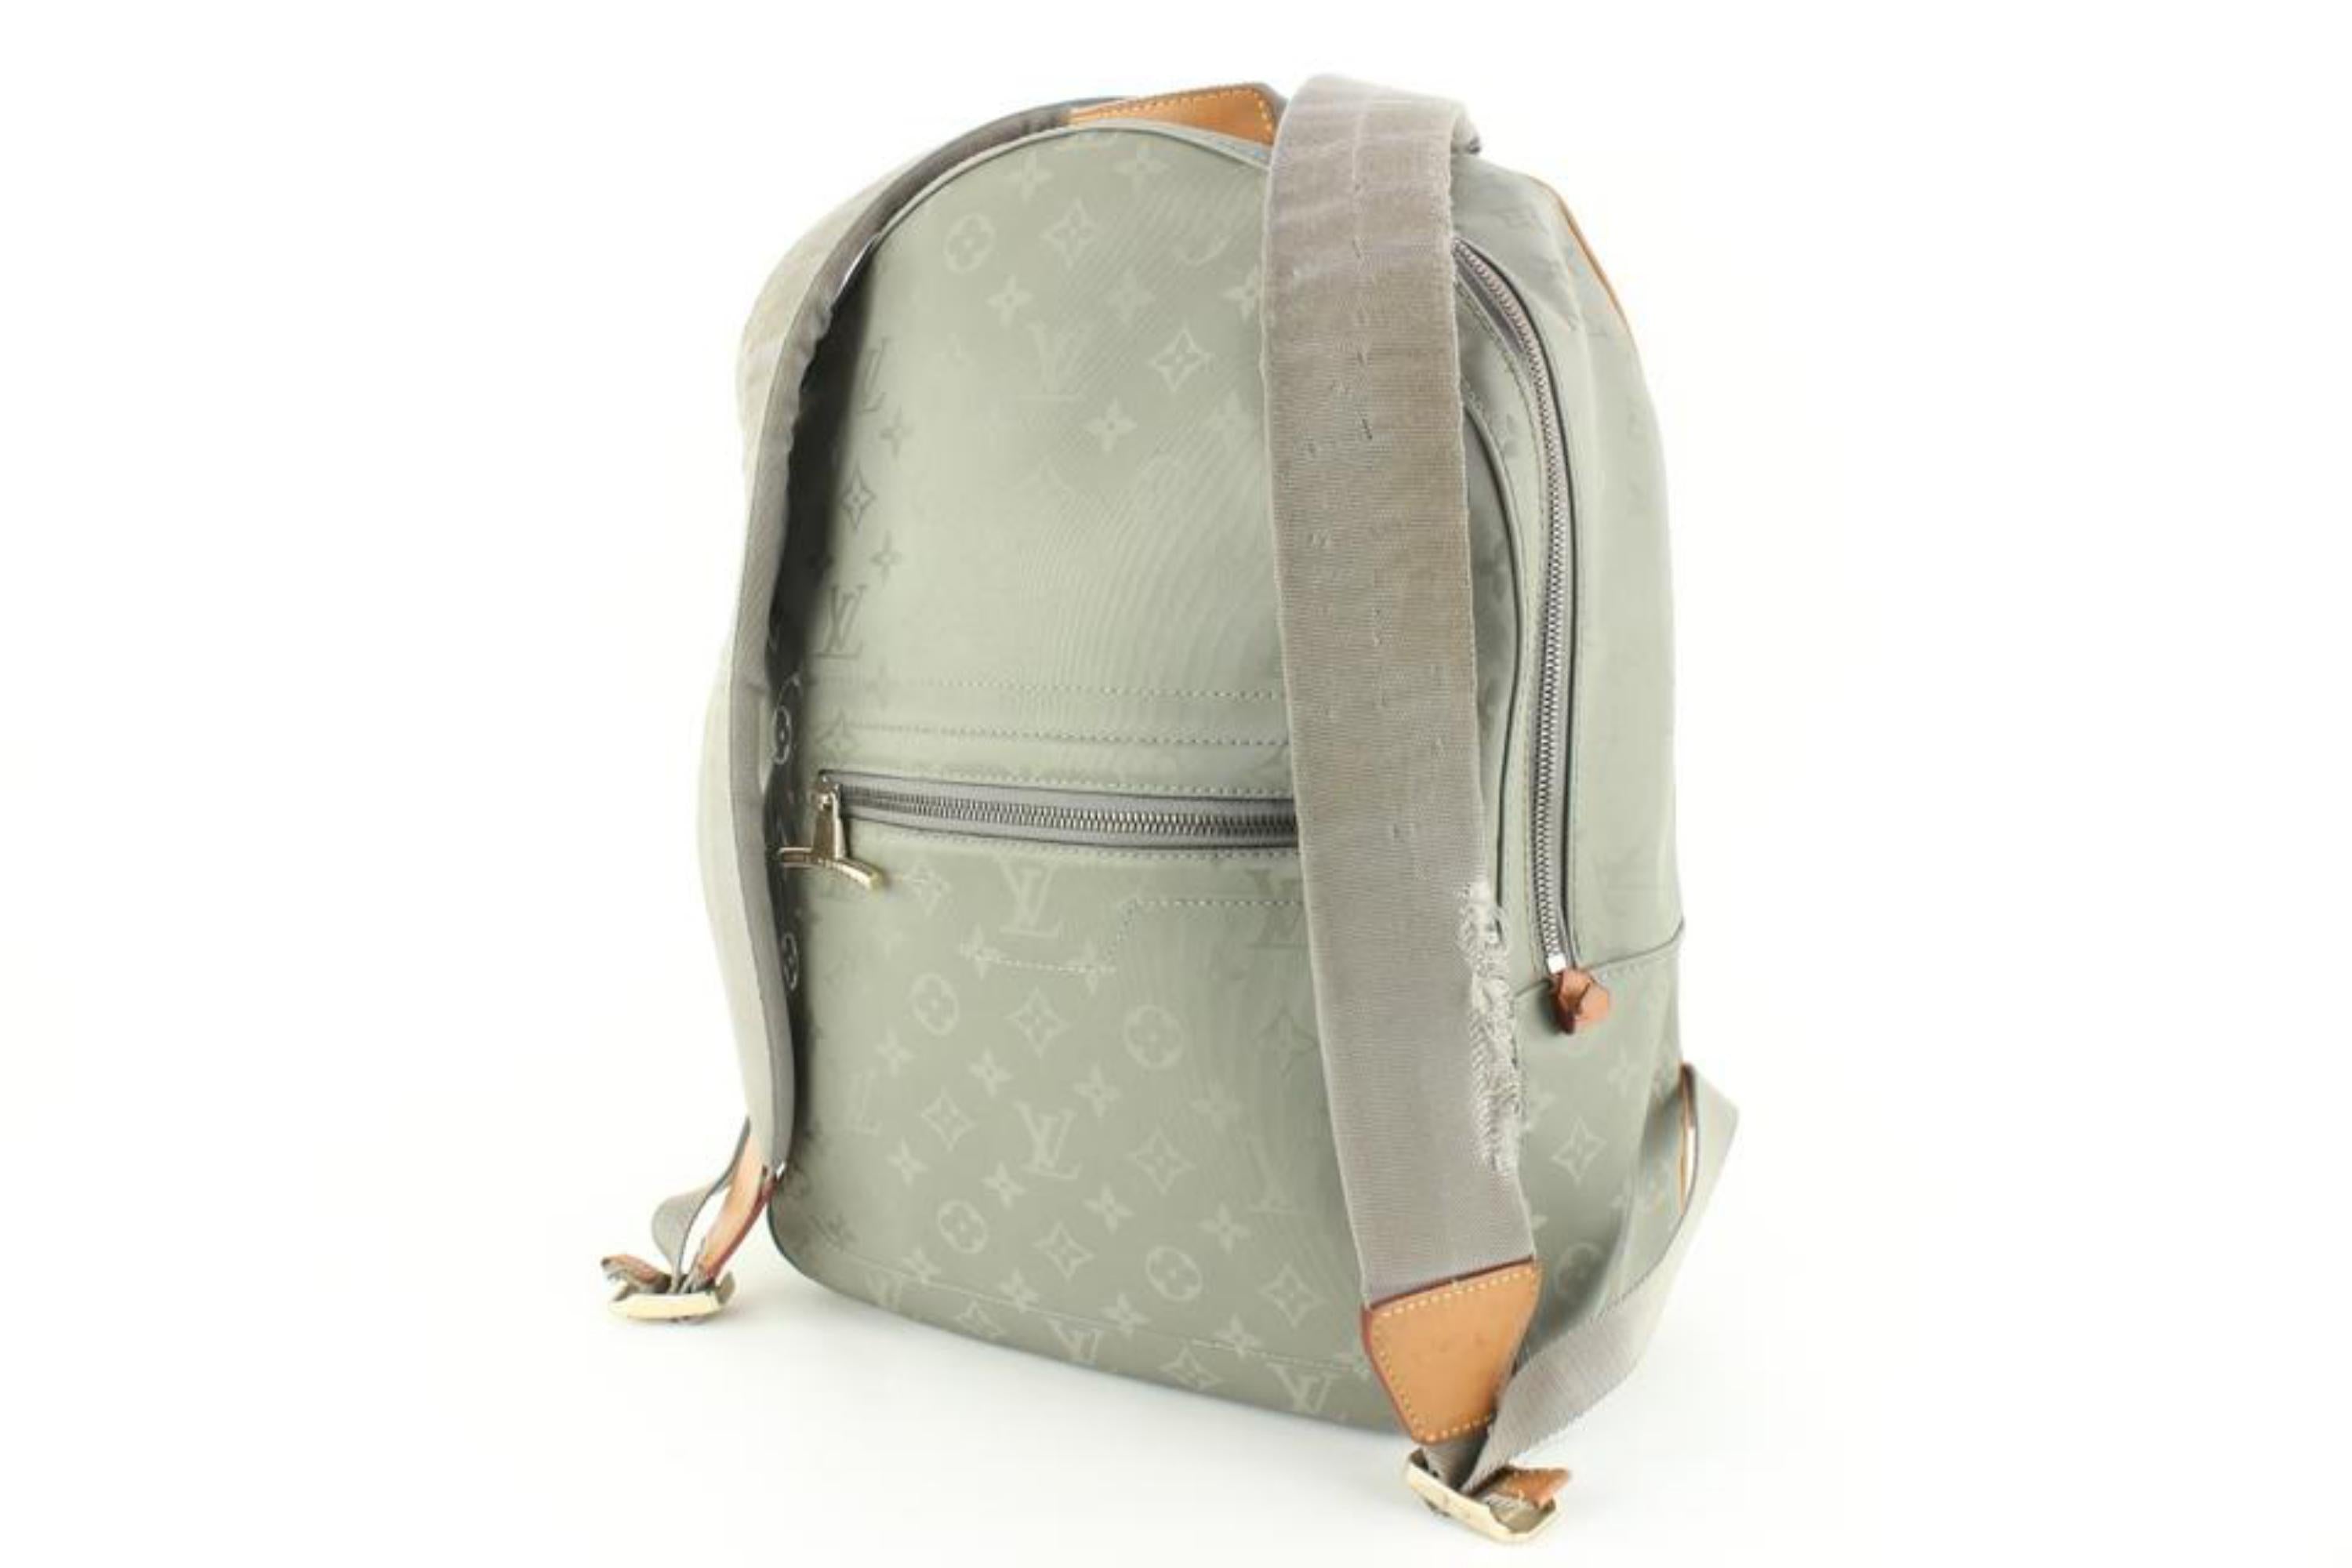 vuitton grey backpack